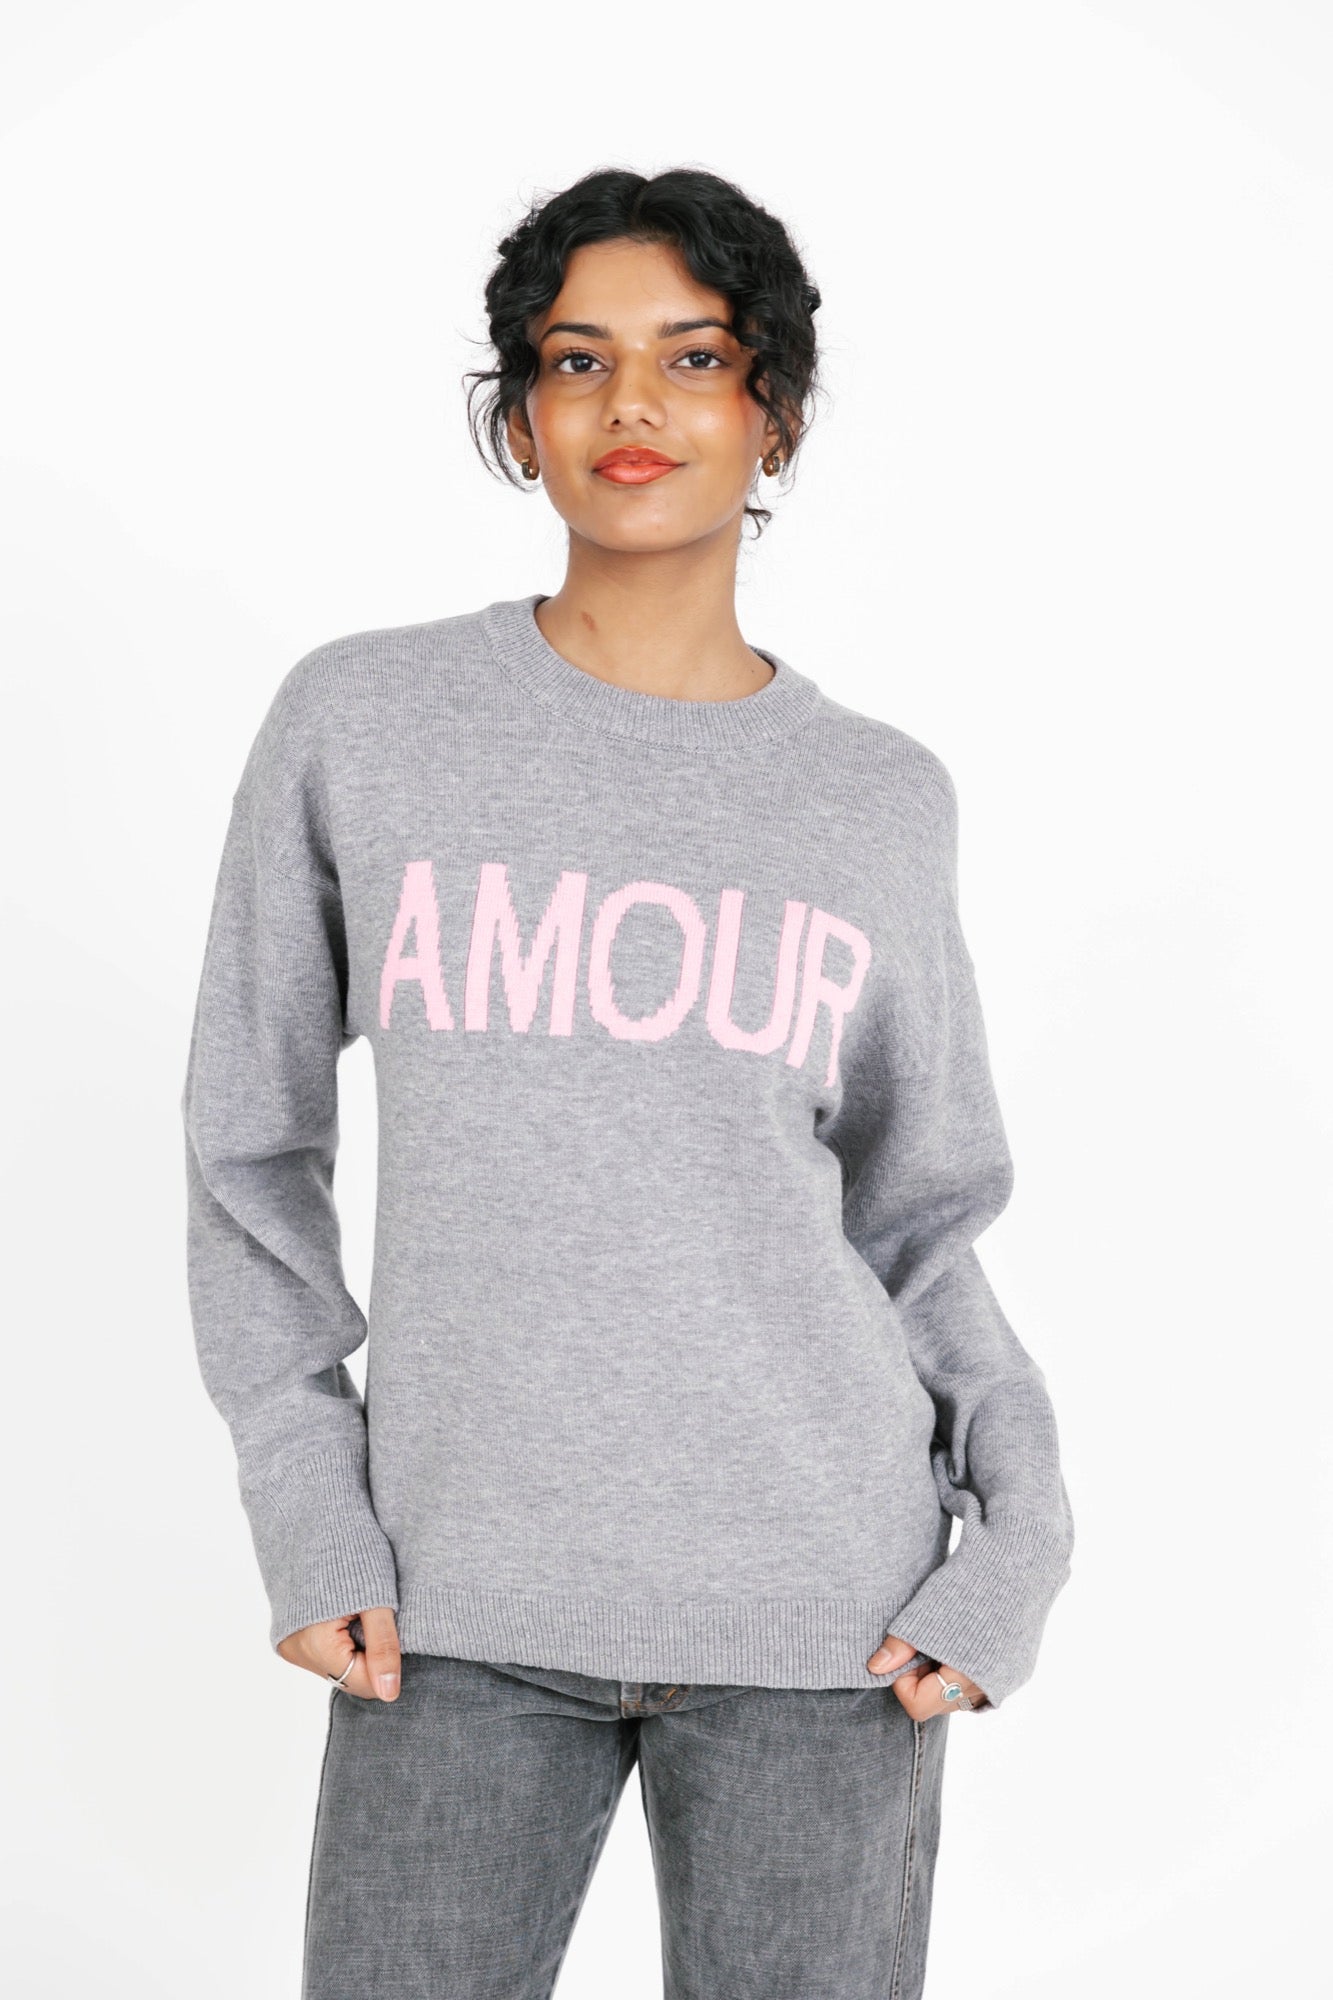 Amour Sweater in Grey/Pink